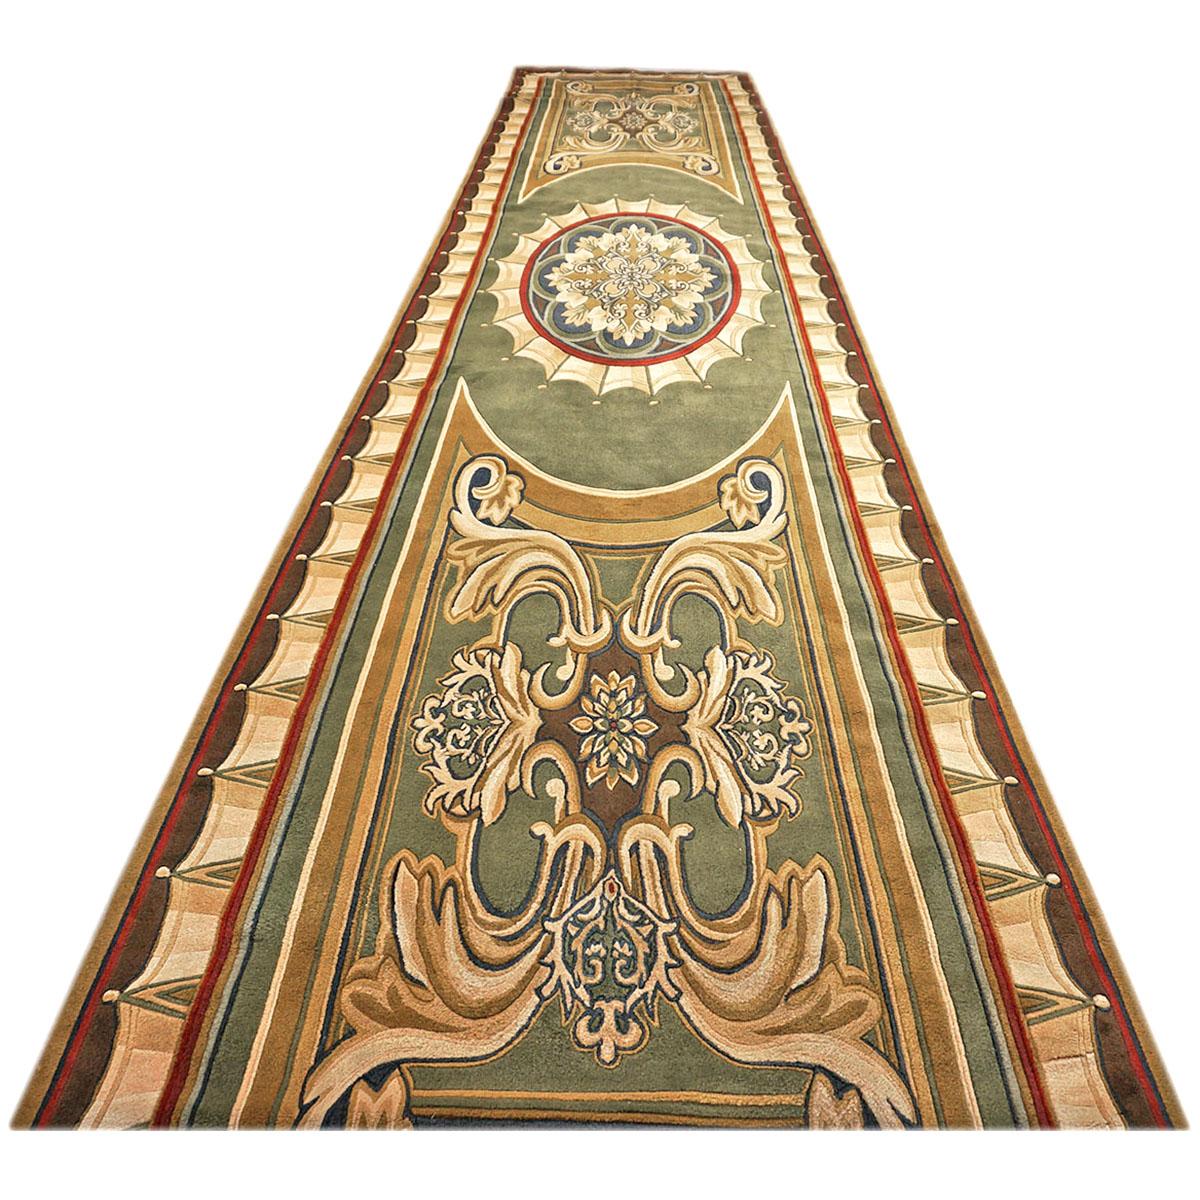 Ashly Fine Rugs presents a 20th-century Vintage French Savonnerie 6x29 green and gold hand-tufted gallery-sized runner. It was custom ordered and created by Edward Fields Long Island NY in a French Savonnerie design in the 1960s. French Savonnerie